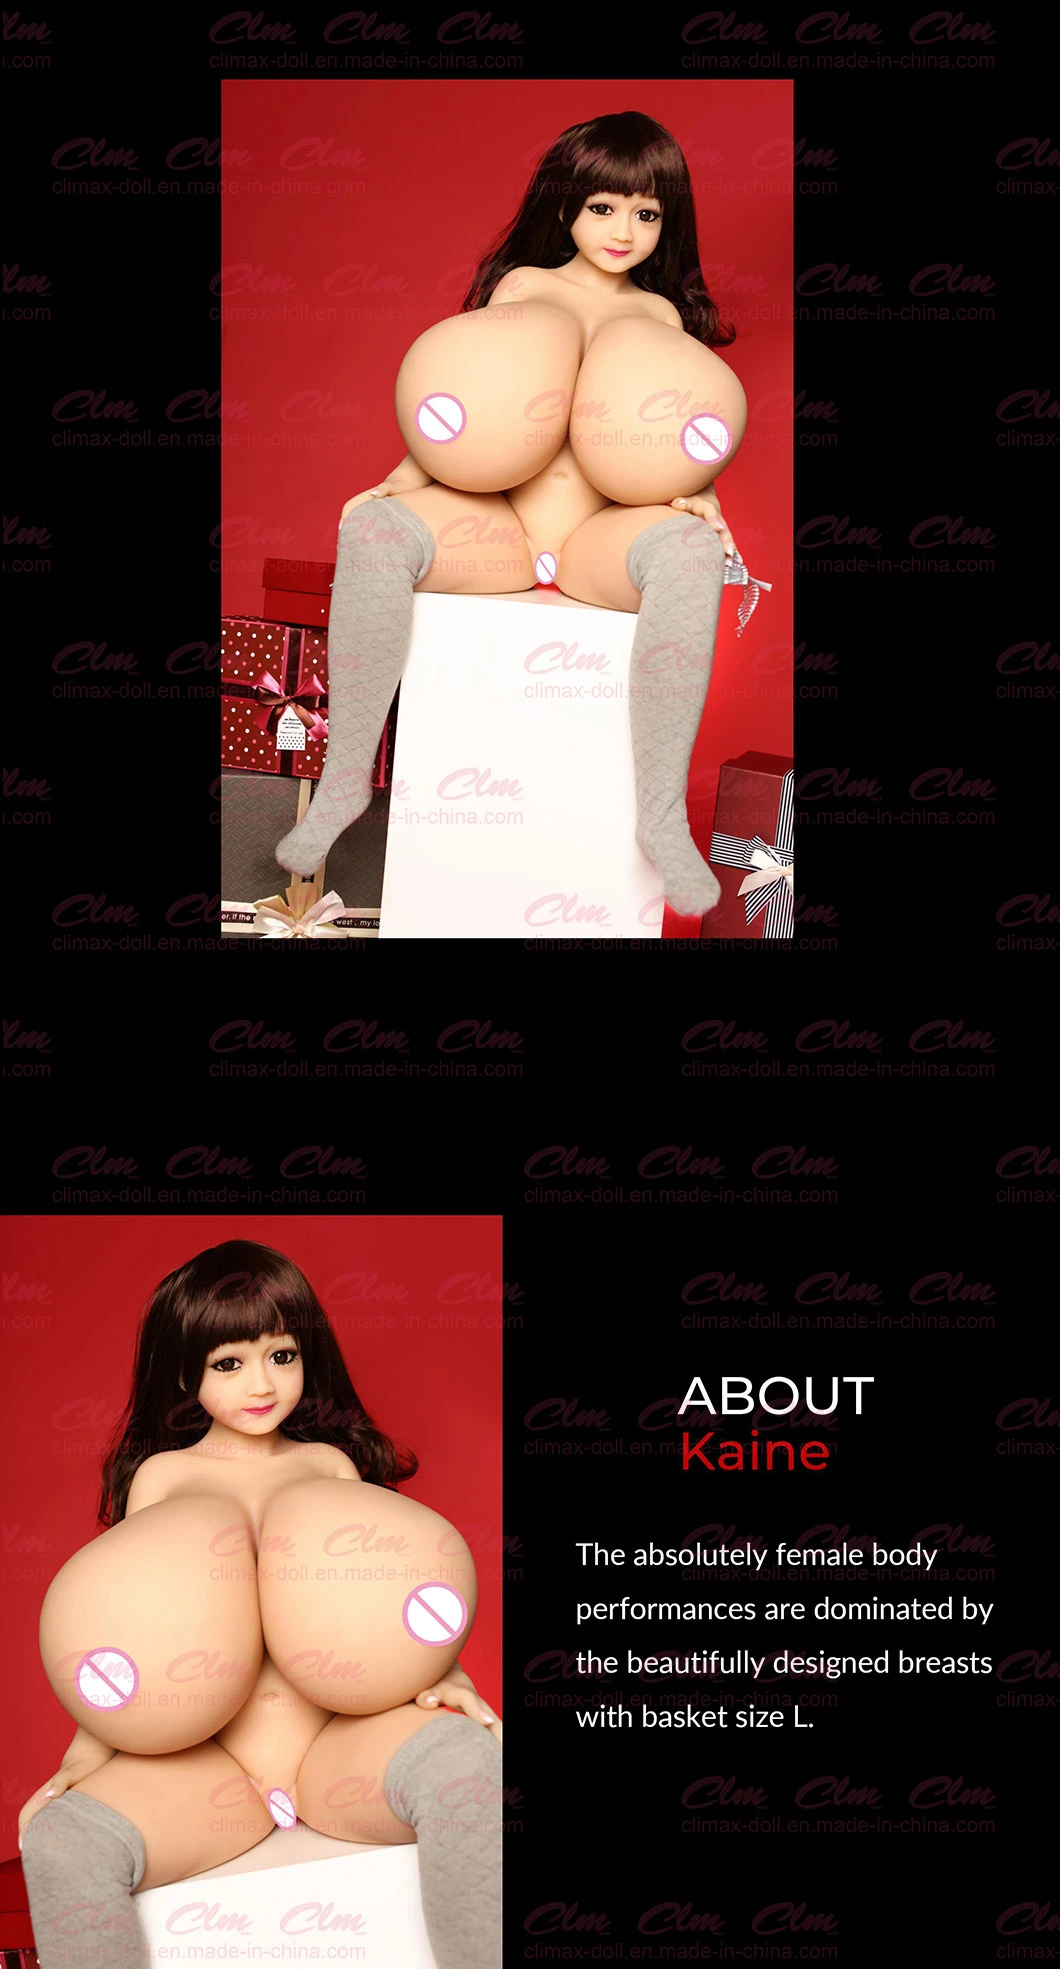 Clm (Climax Doll) Mini Loli Size Big Boobs Adult Sex Doll Cheap Price Real Touch Vagina Anus 2 Holes TPE Sex Toy for Men